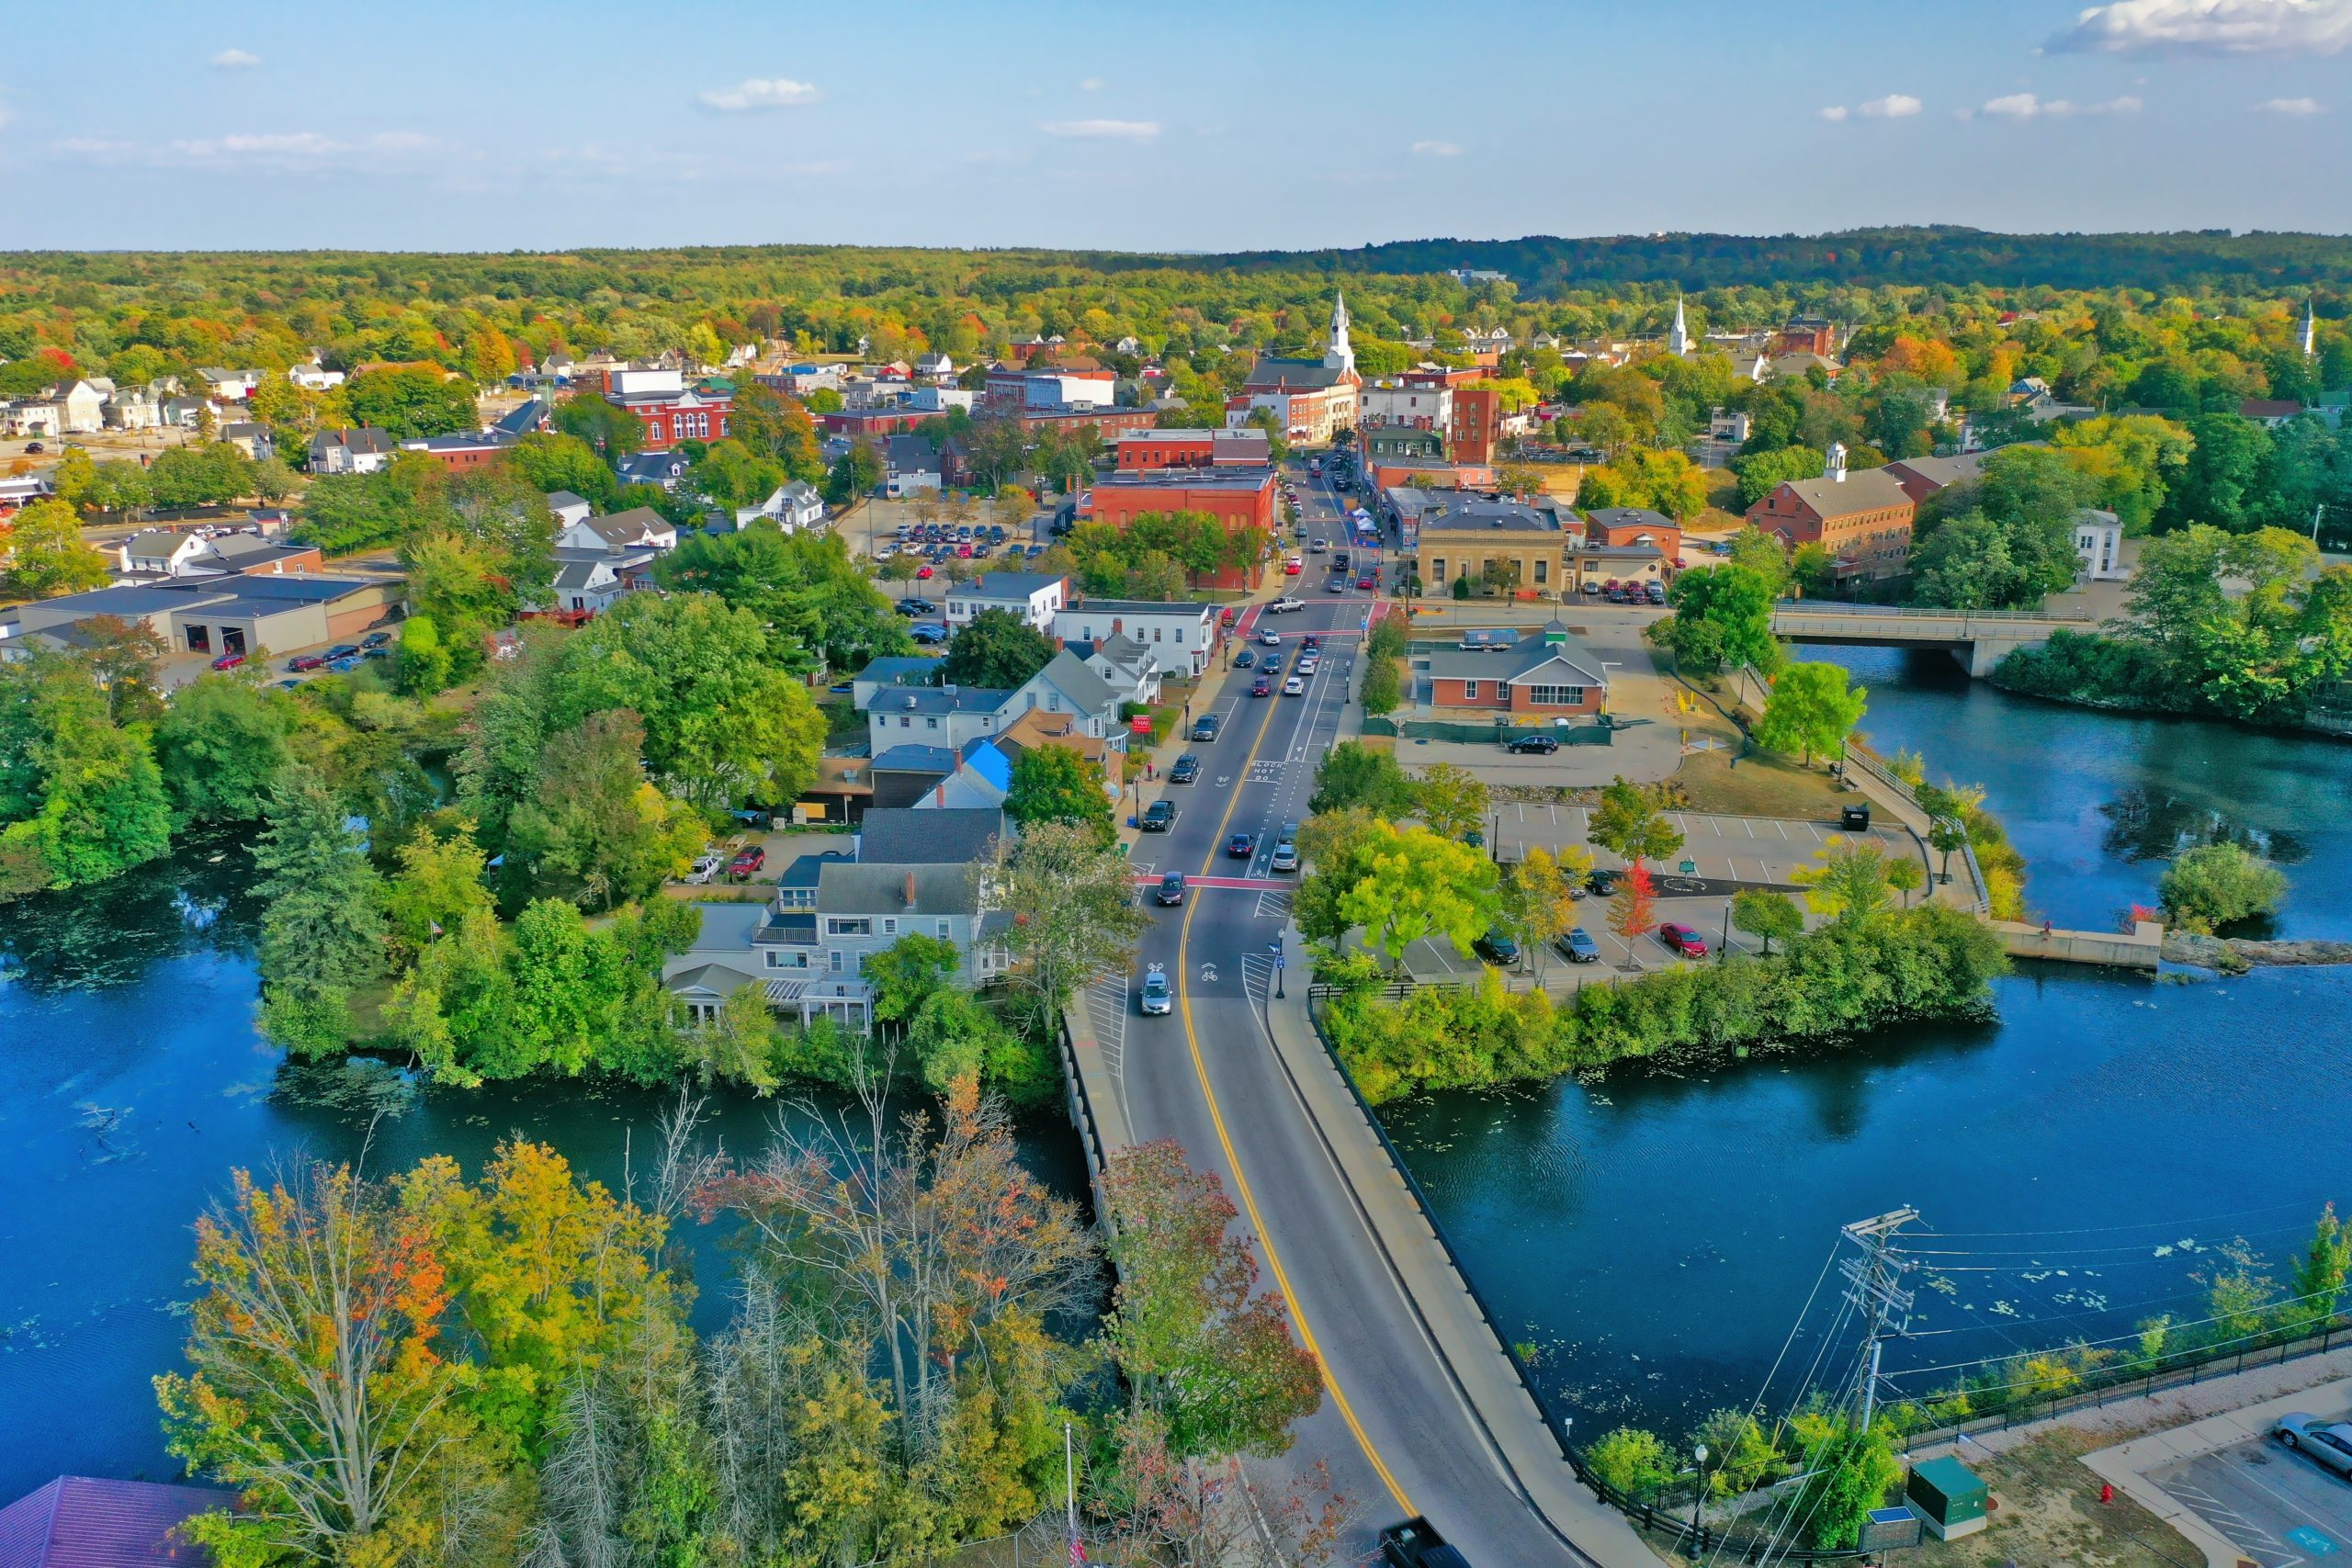 Arial view of New England Town